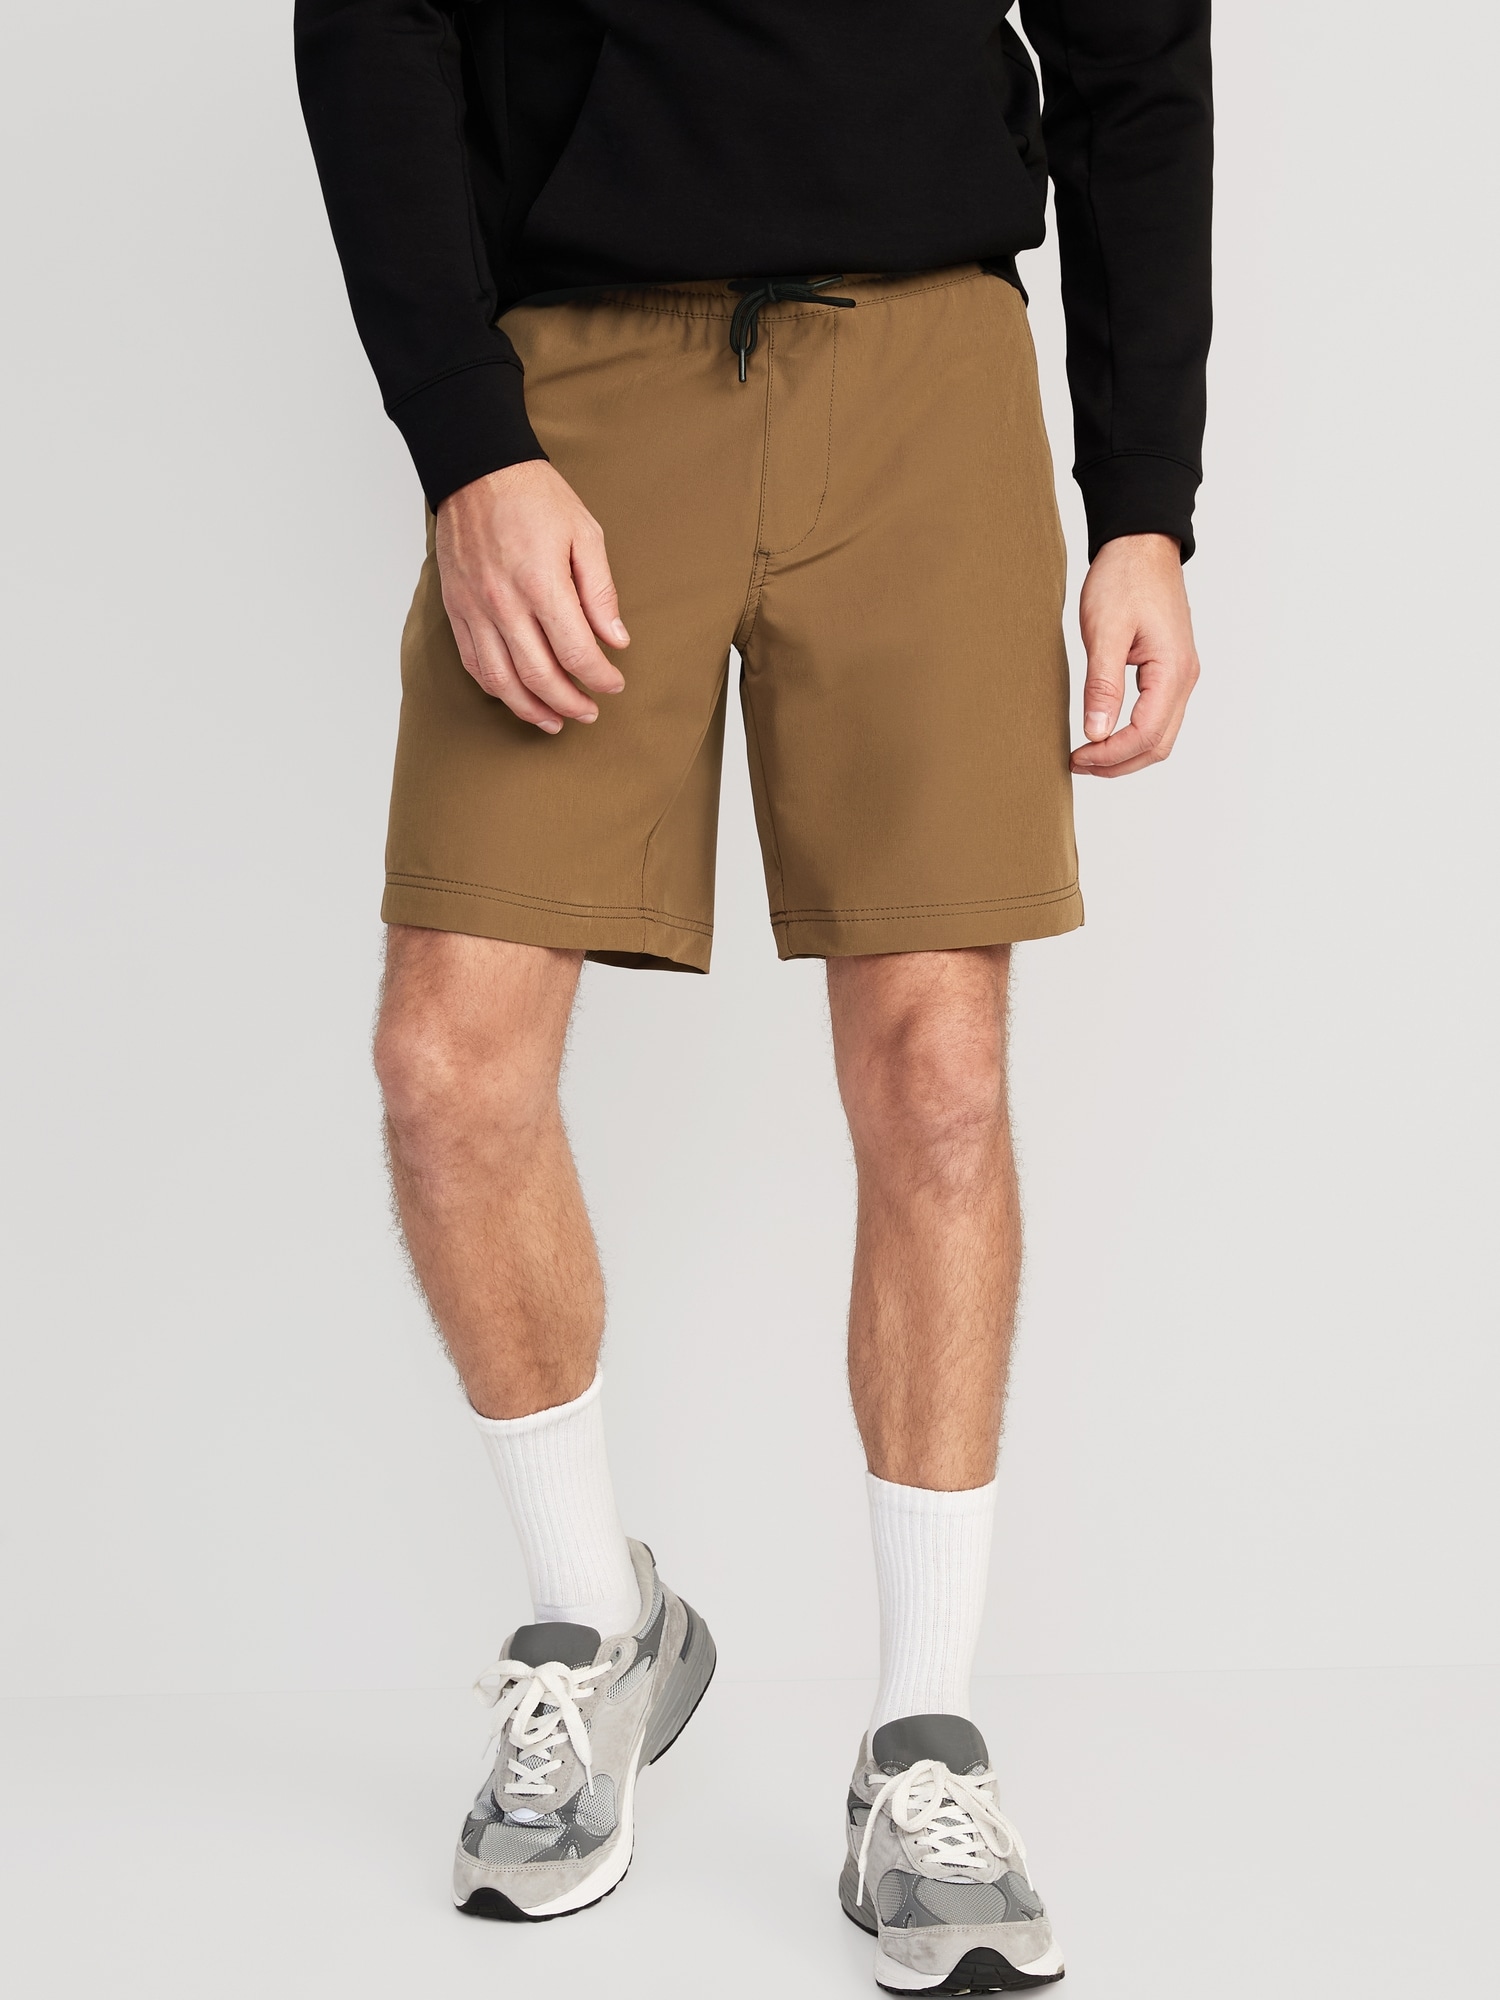 StretchTech Water-Repellent Jogger Shorts -- 7-inch inseam